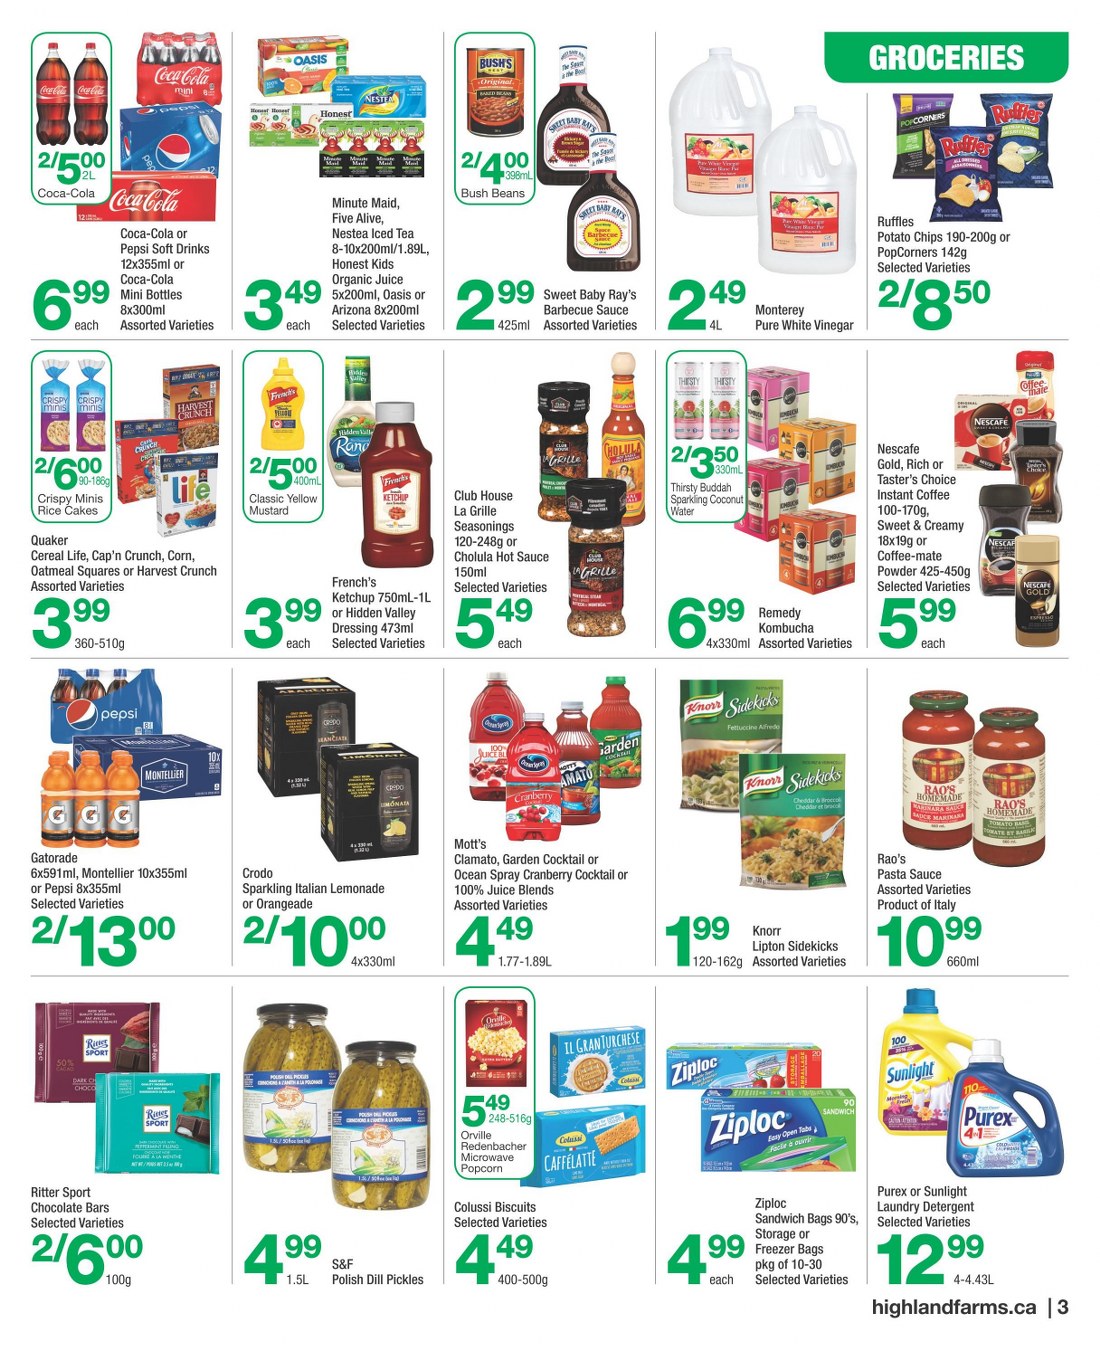 highland farms flyer june 20 to july 3 3